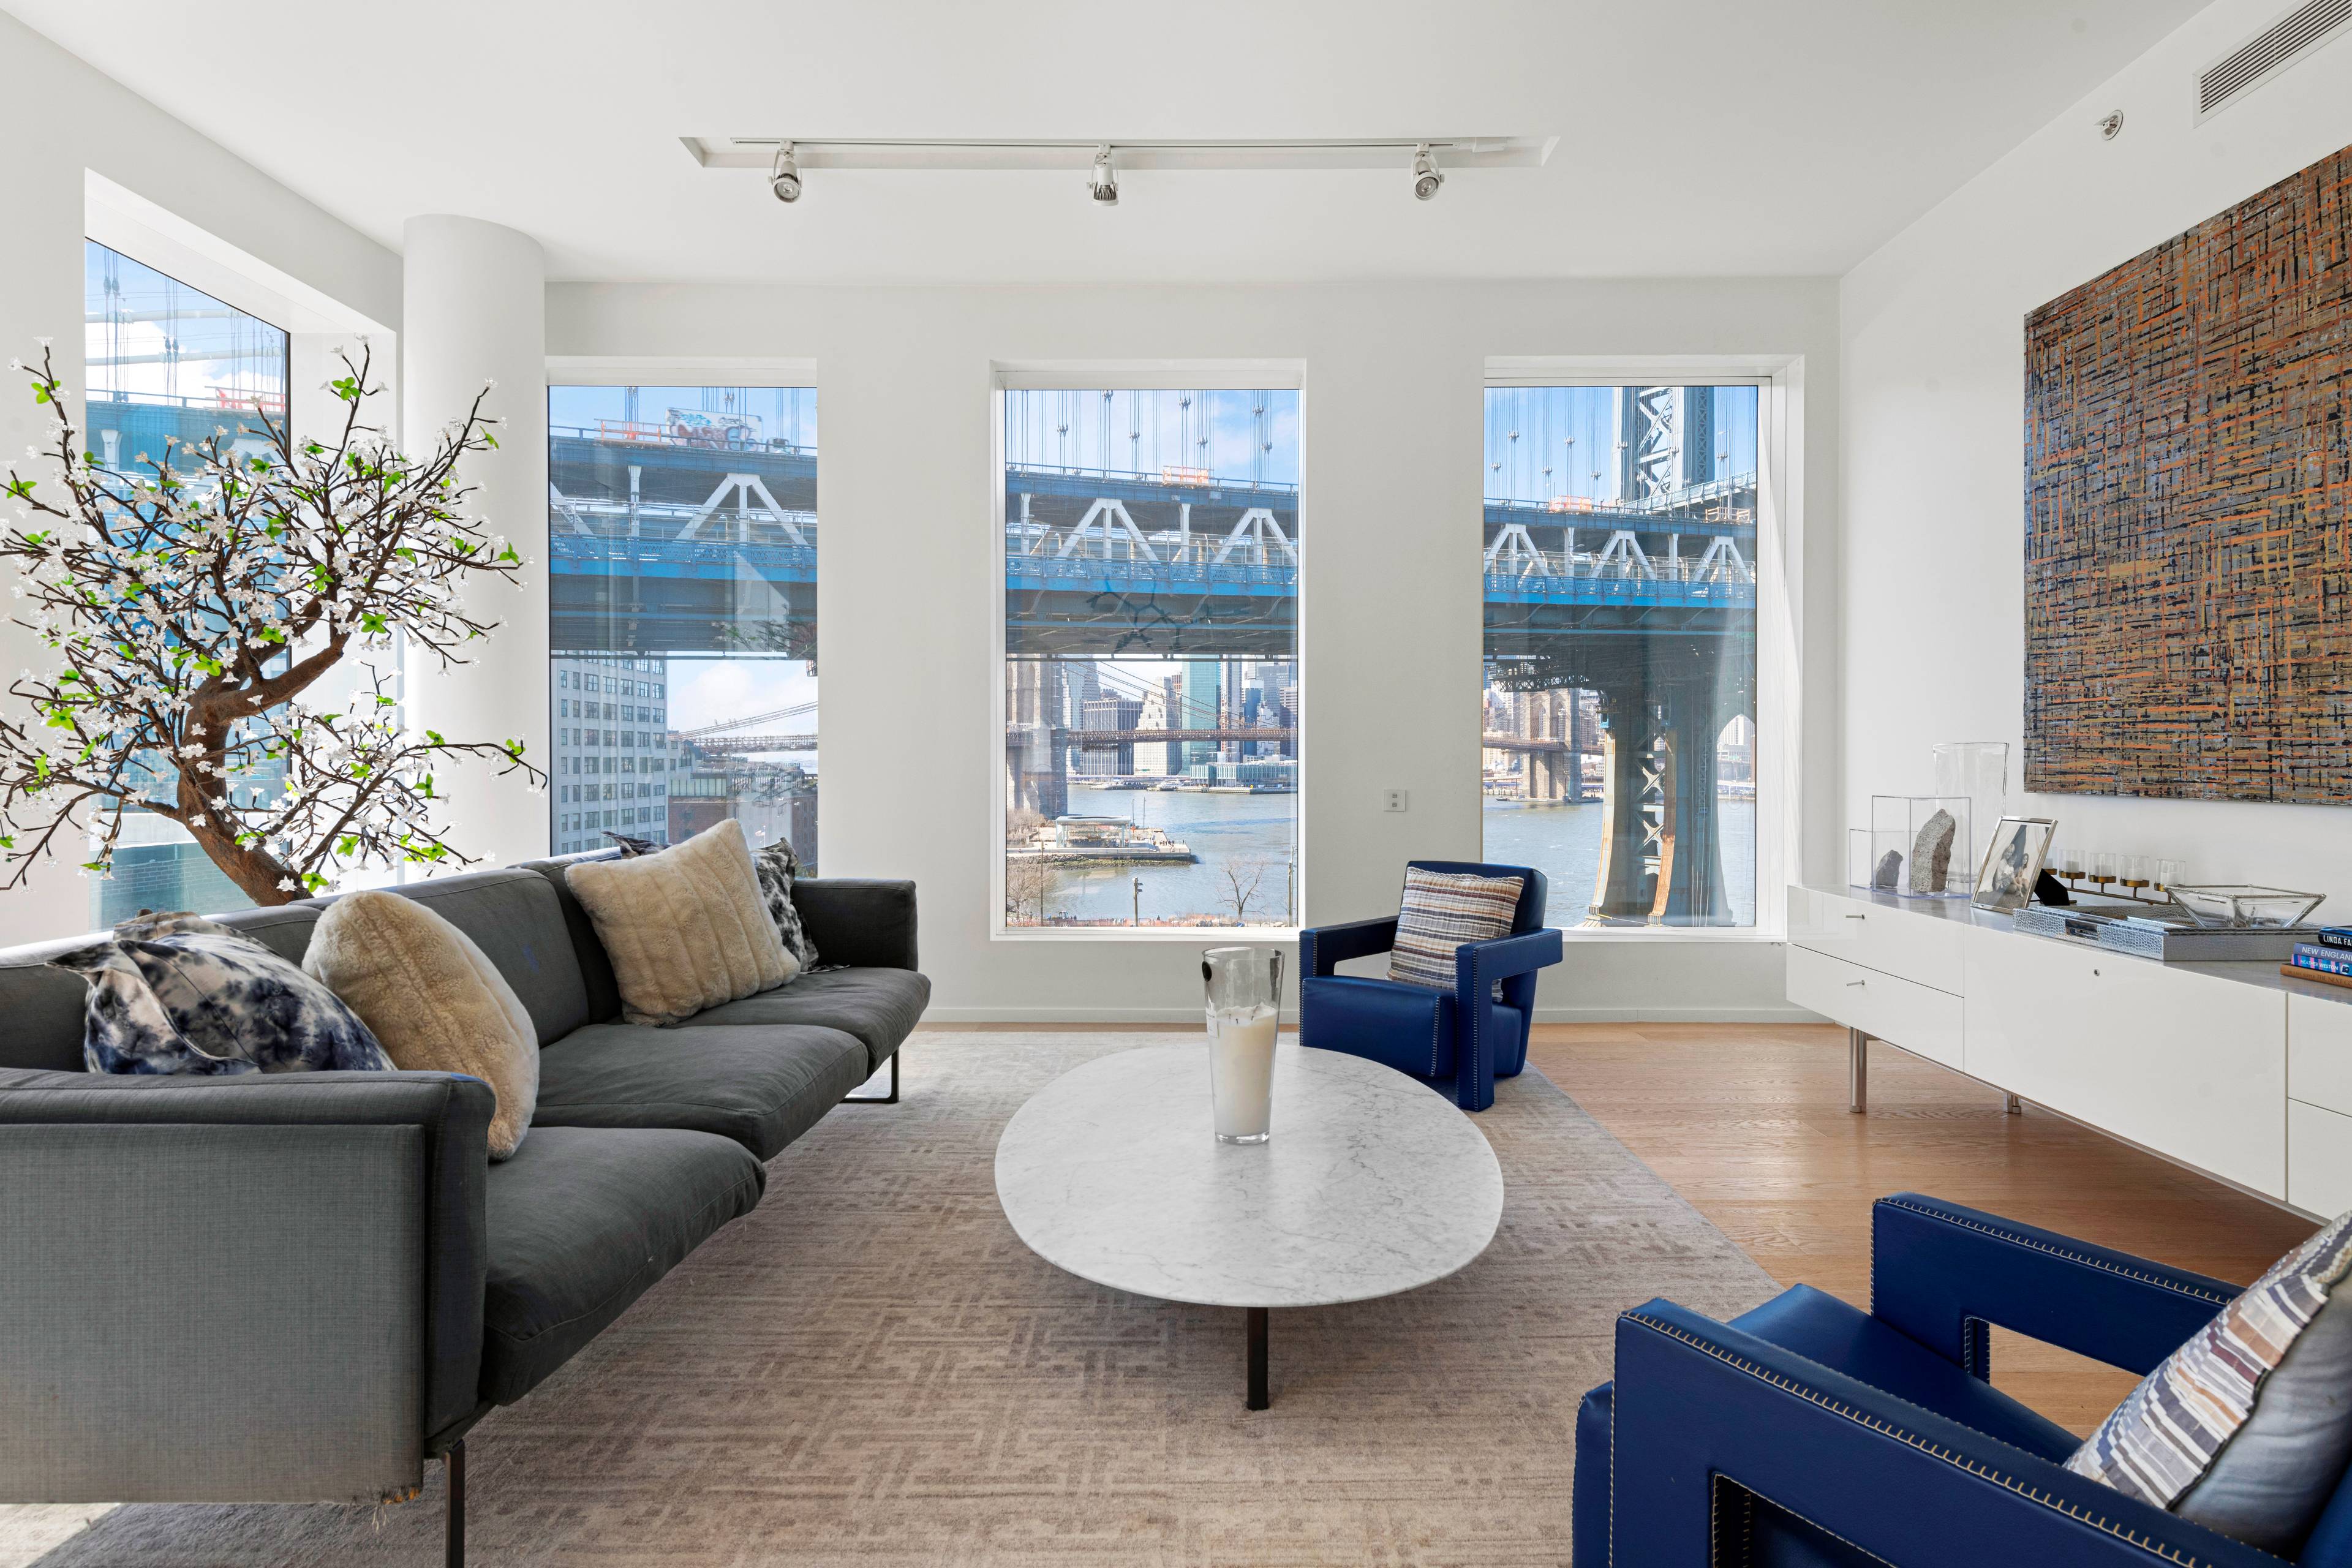 Modern Loft living at its finest, everything about this residences emanates luxury.